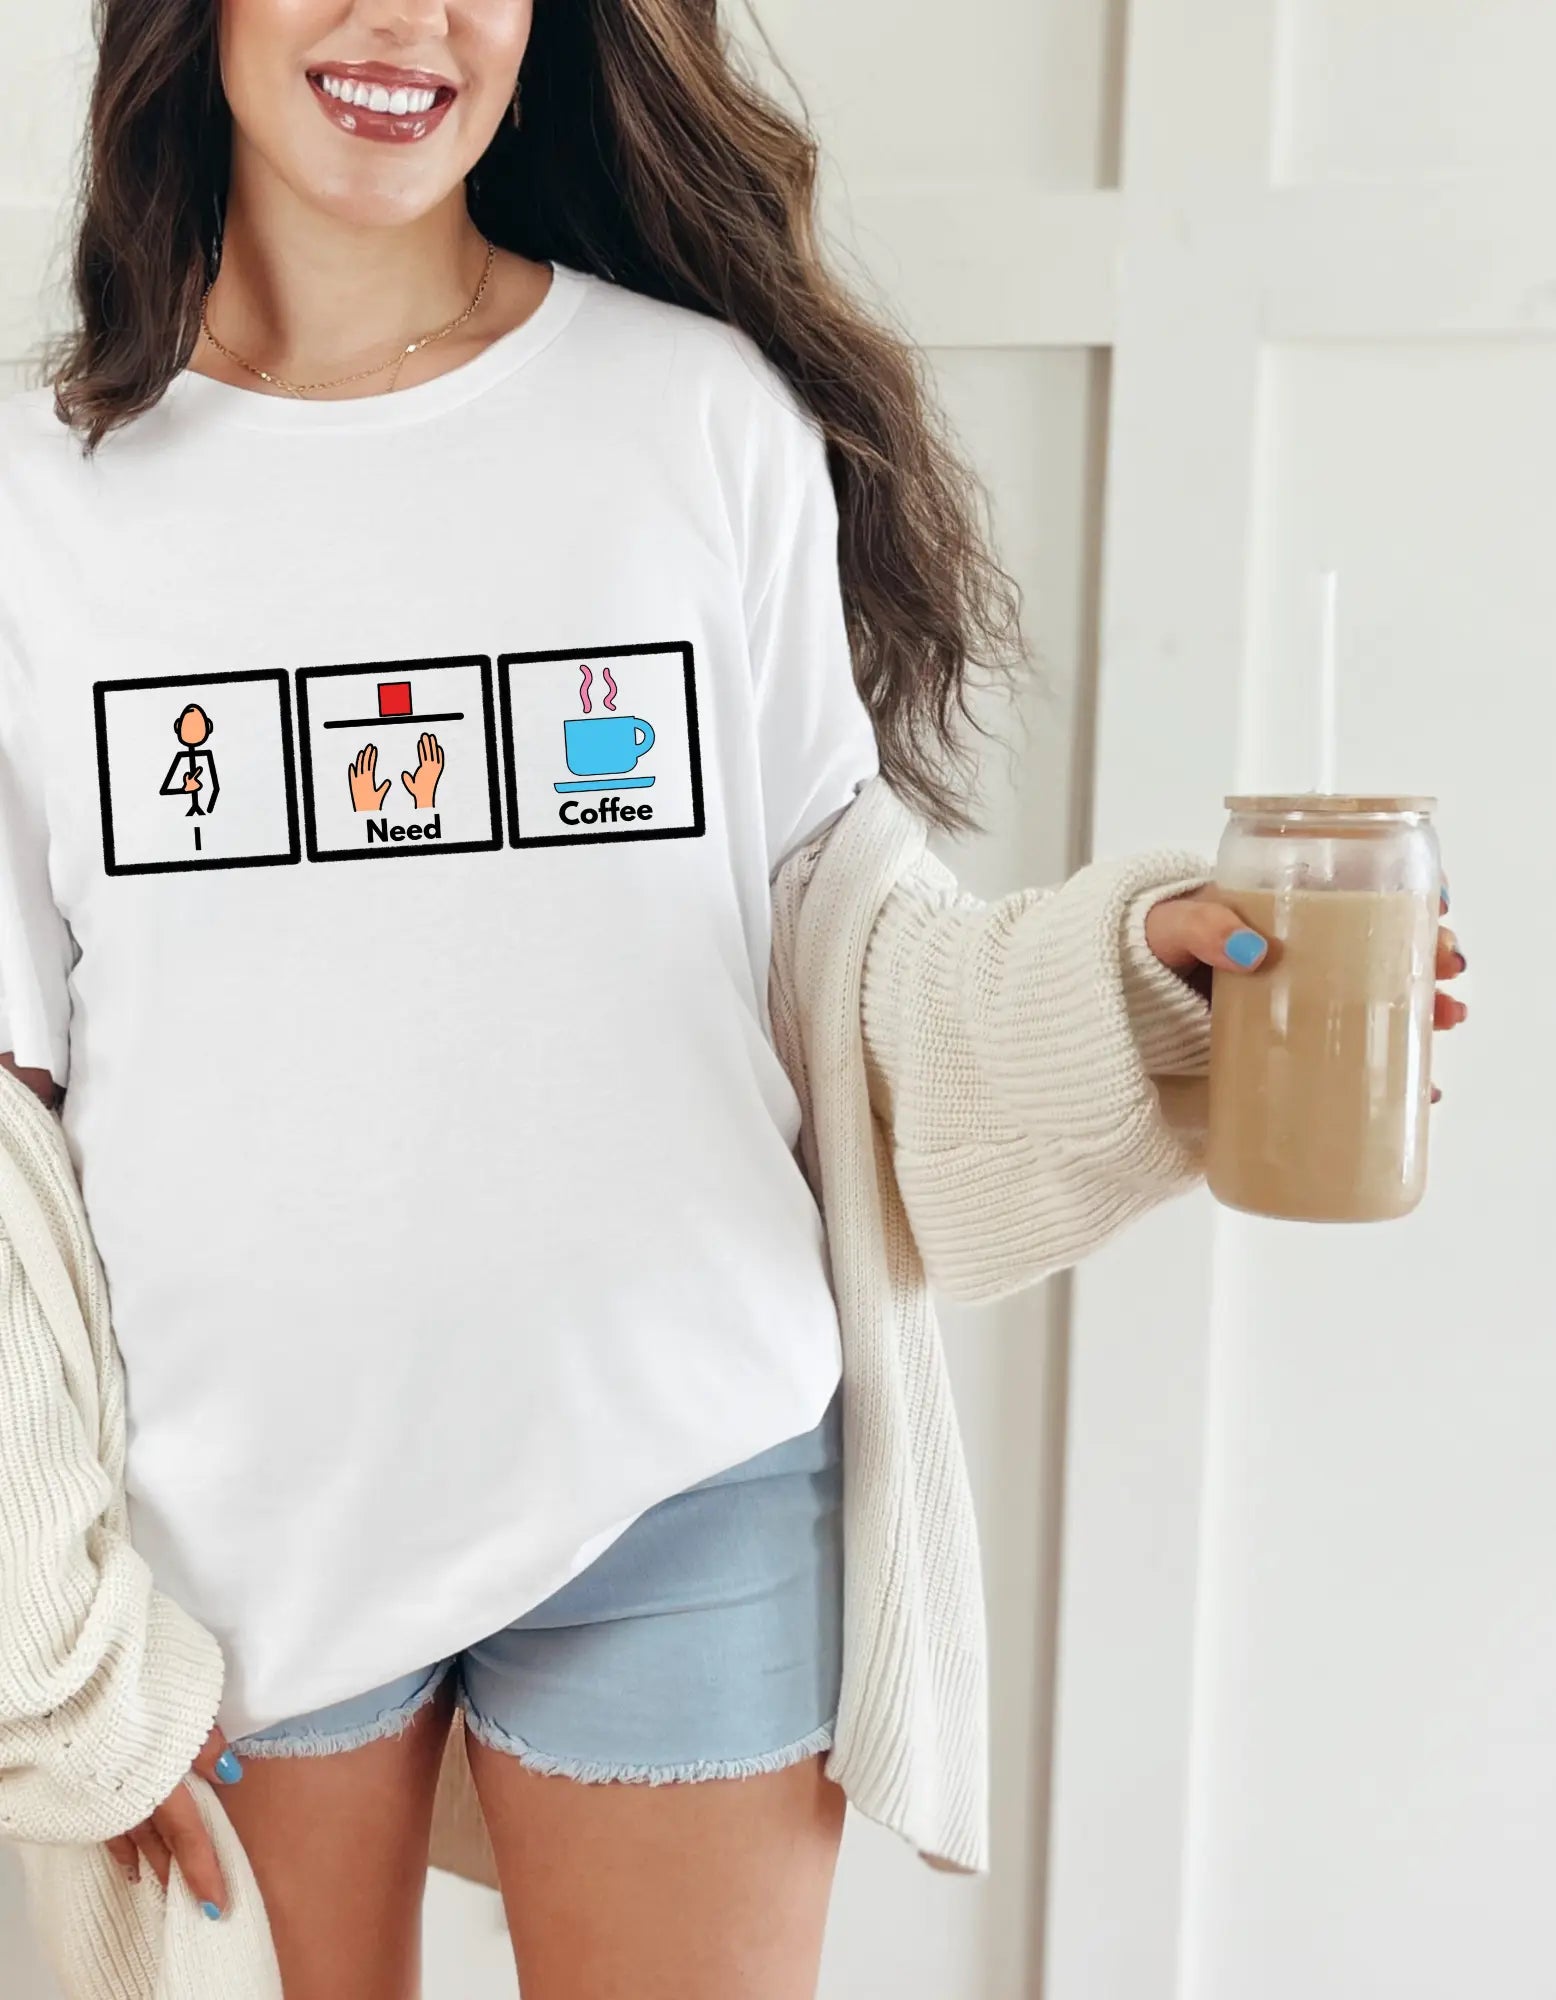 I Need Coffee Picture Communication Symbol Unisex T-Shirt This Unique Shirt is the Perfect Gift for a Coffee Lover or Present for Self Affordable ABA Materials